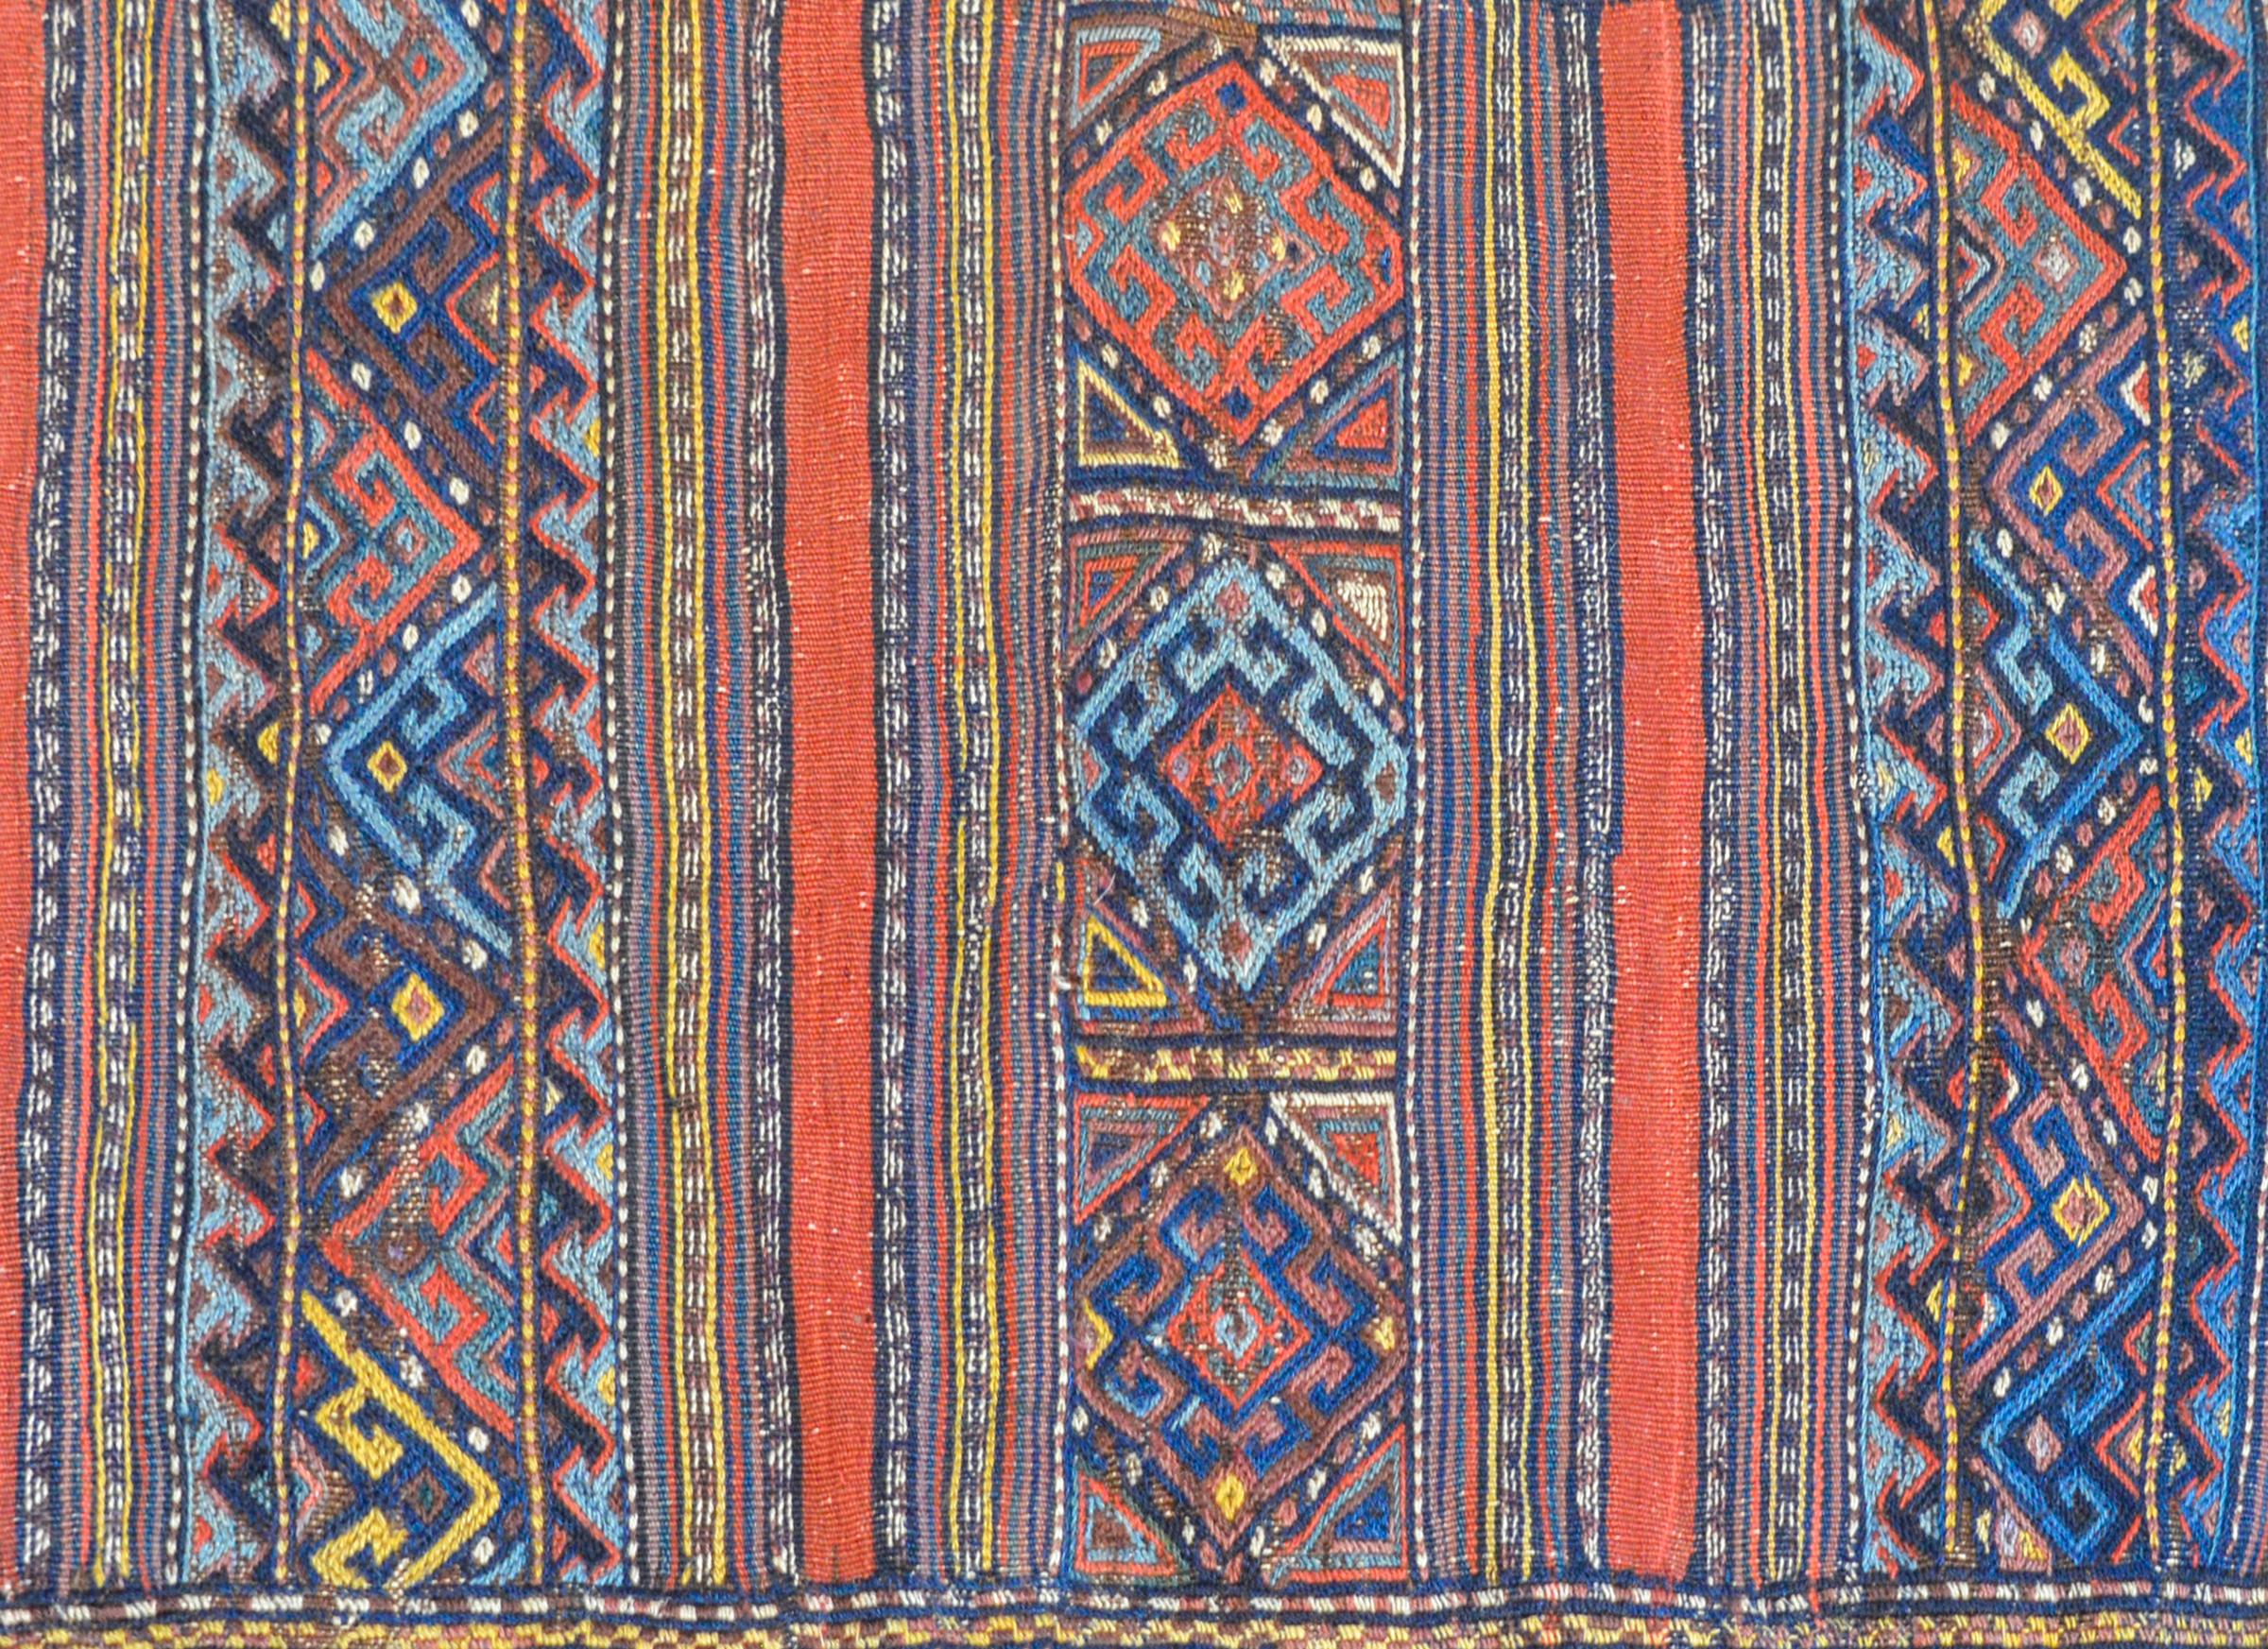 An outstanding early 20th century shahsevan bag face rug with an elaborately woven pattern containing solid stripes, geometric patterned stripes, all woven in indigo, gold, crimson, and white vegetable dyed wool. The border is similarly patterned,